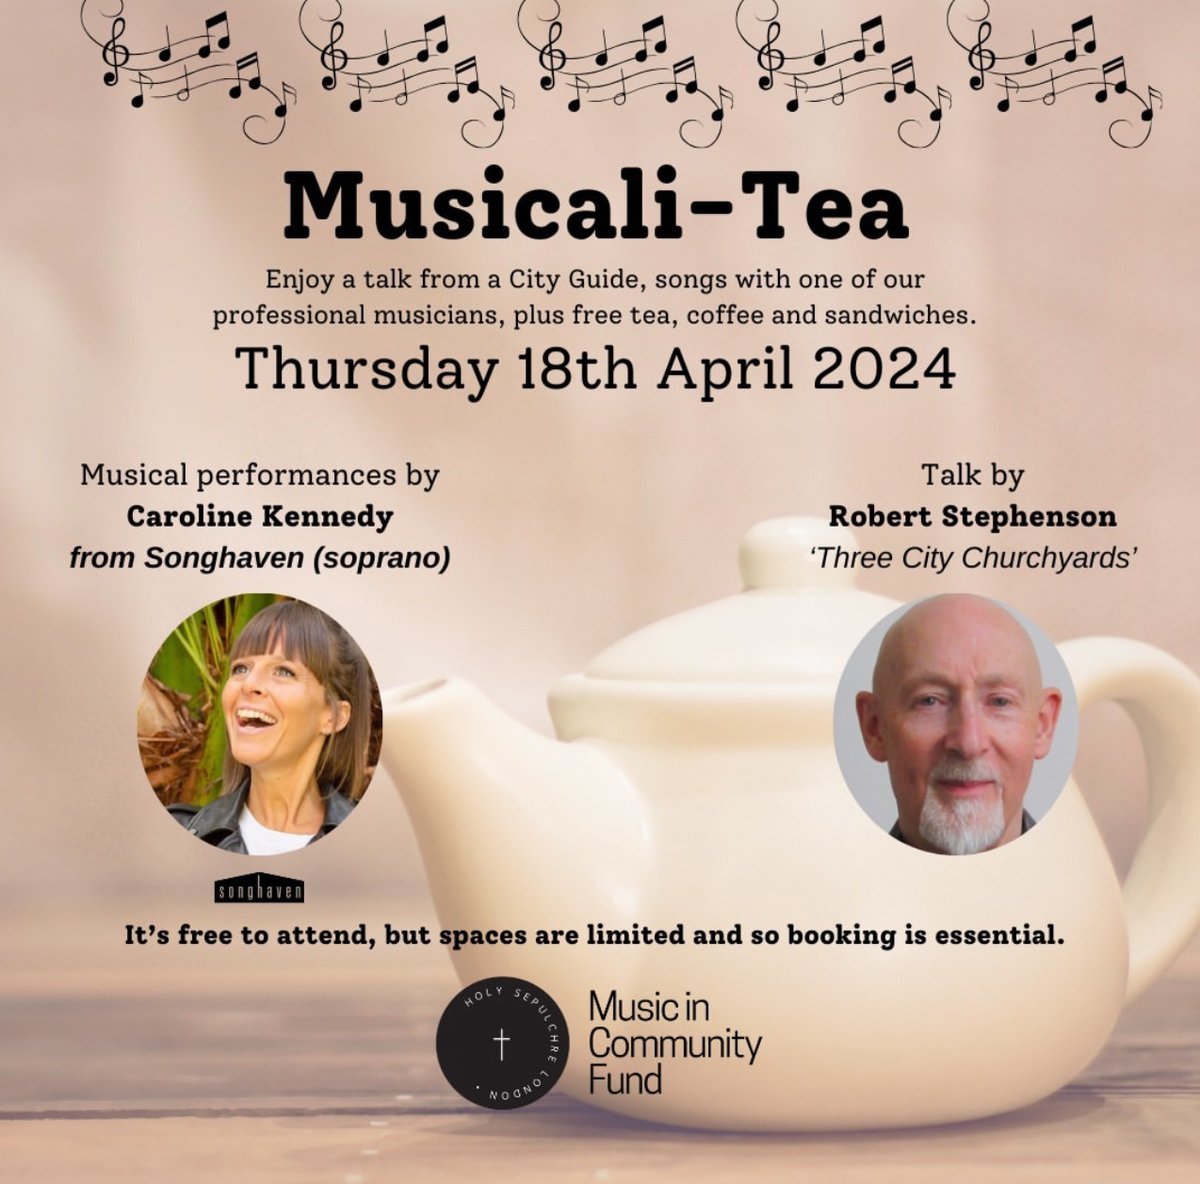 We will be resuming our community cafe event 'Musicali-Tea' this coming Thursday; with a musical performance from Caroline Kennedy from @songhaven_uk and a talk by Robert Stephenson. For more details, visit our website (hsl.church/upcoming-events). We hope to see you there.